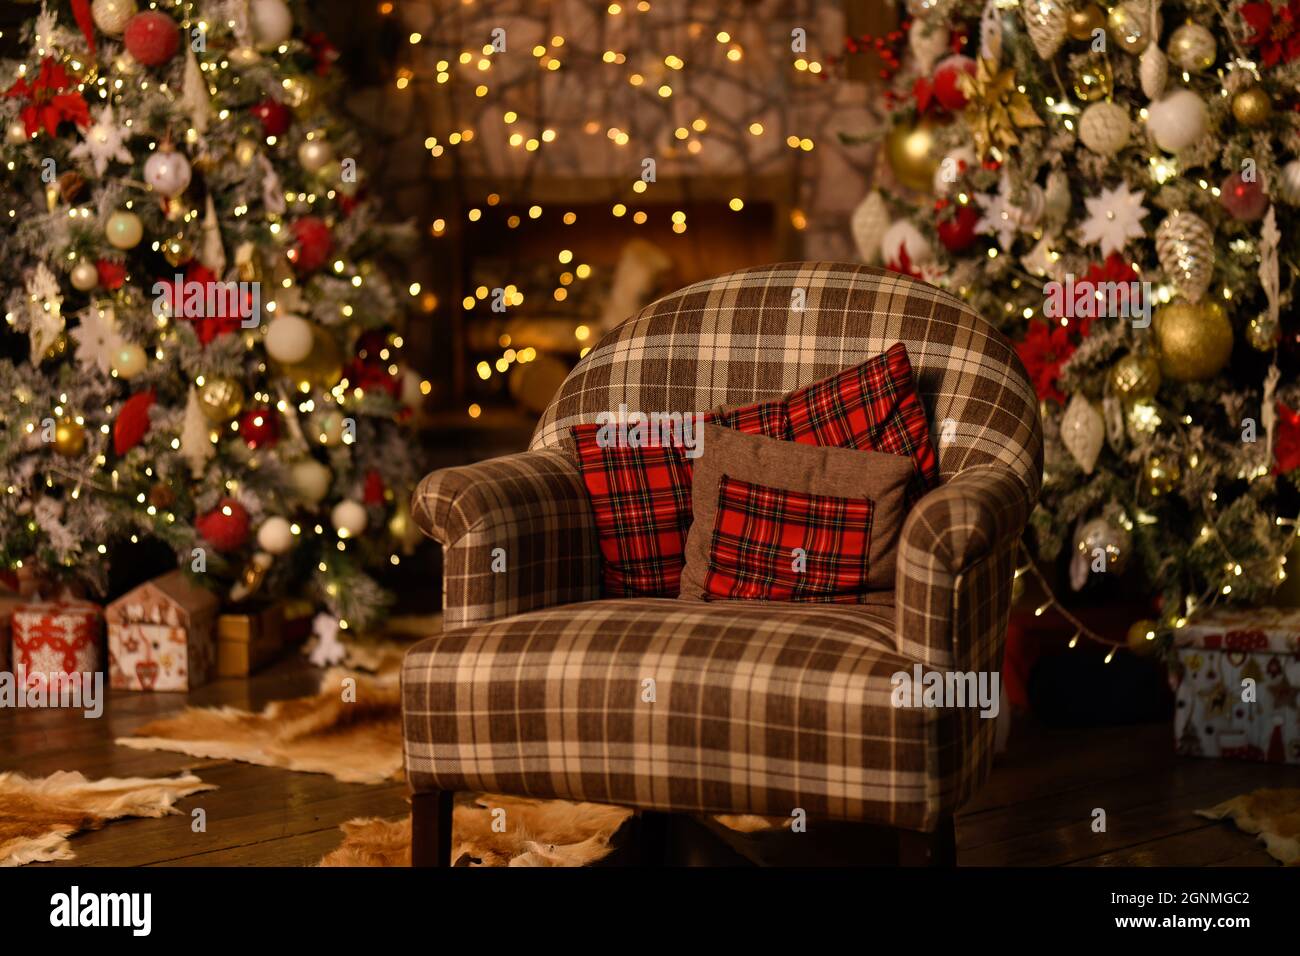 red chair in the New Year's interior Stock Photo